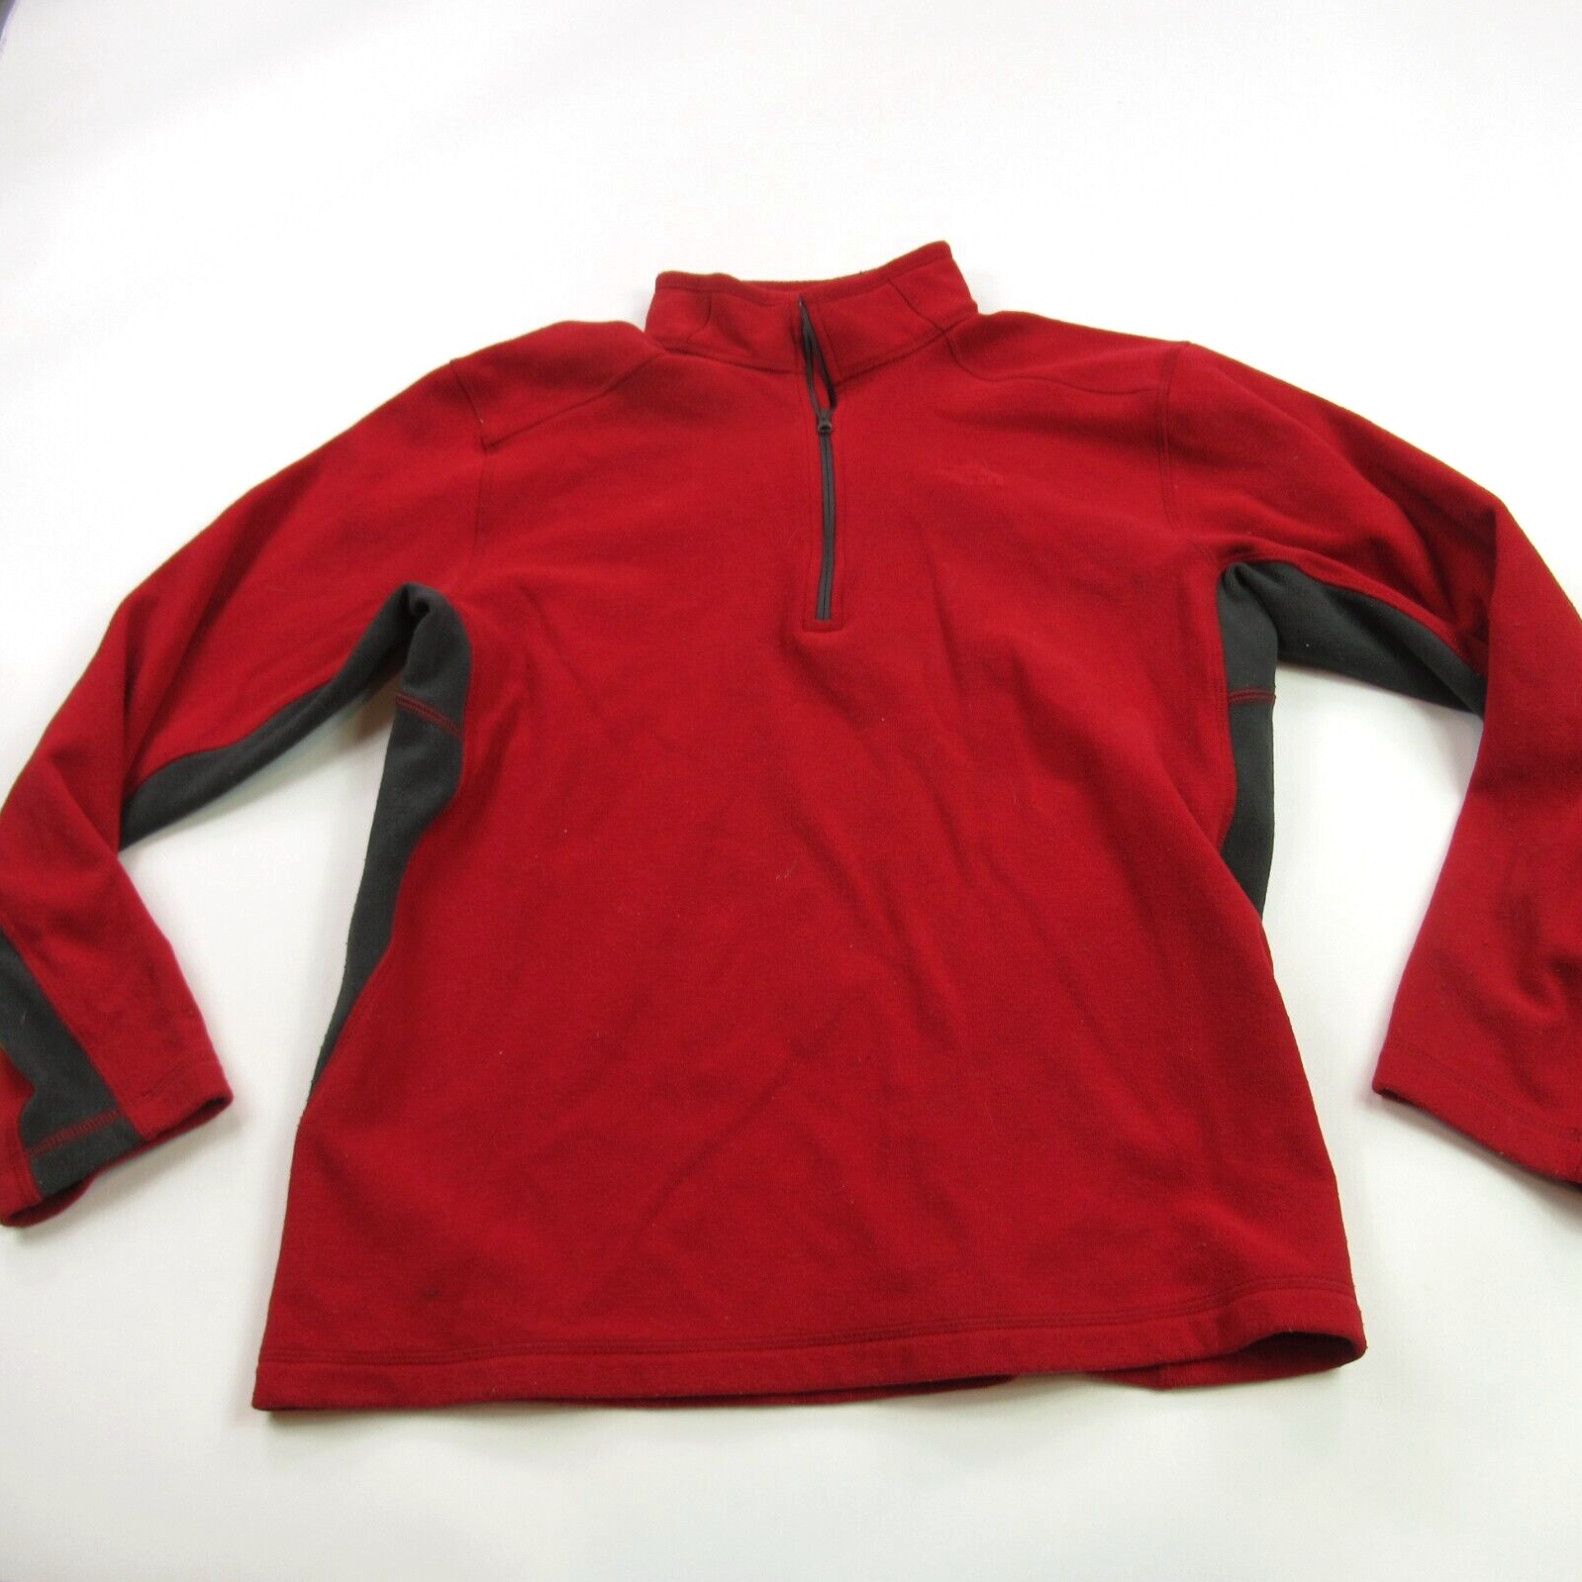 The North Face North Face Sweater Mens Large Long Sleeve 1/4 Zip Pullover Red Fleece Casual Size US L / EU 52-54 / 3 - 1 Preview